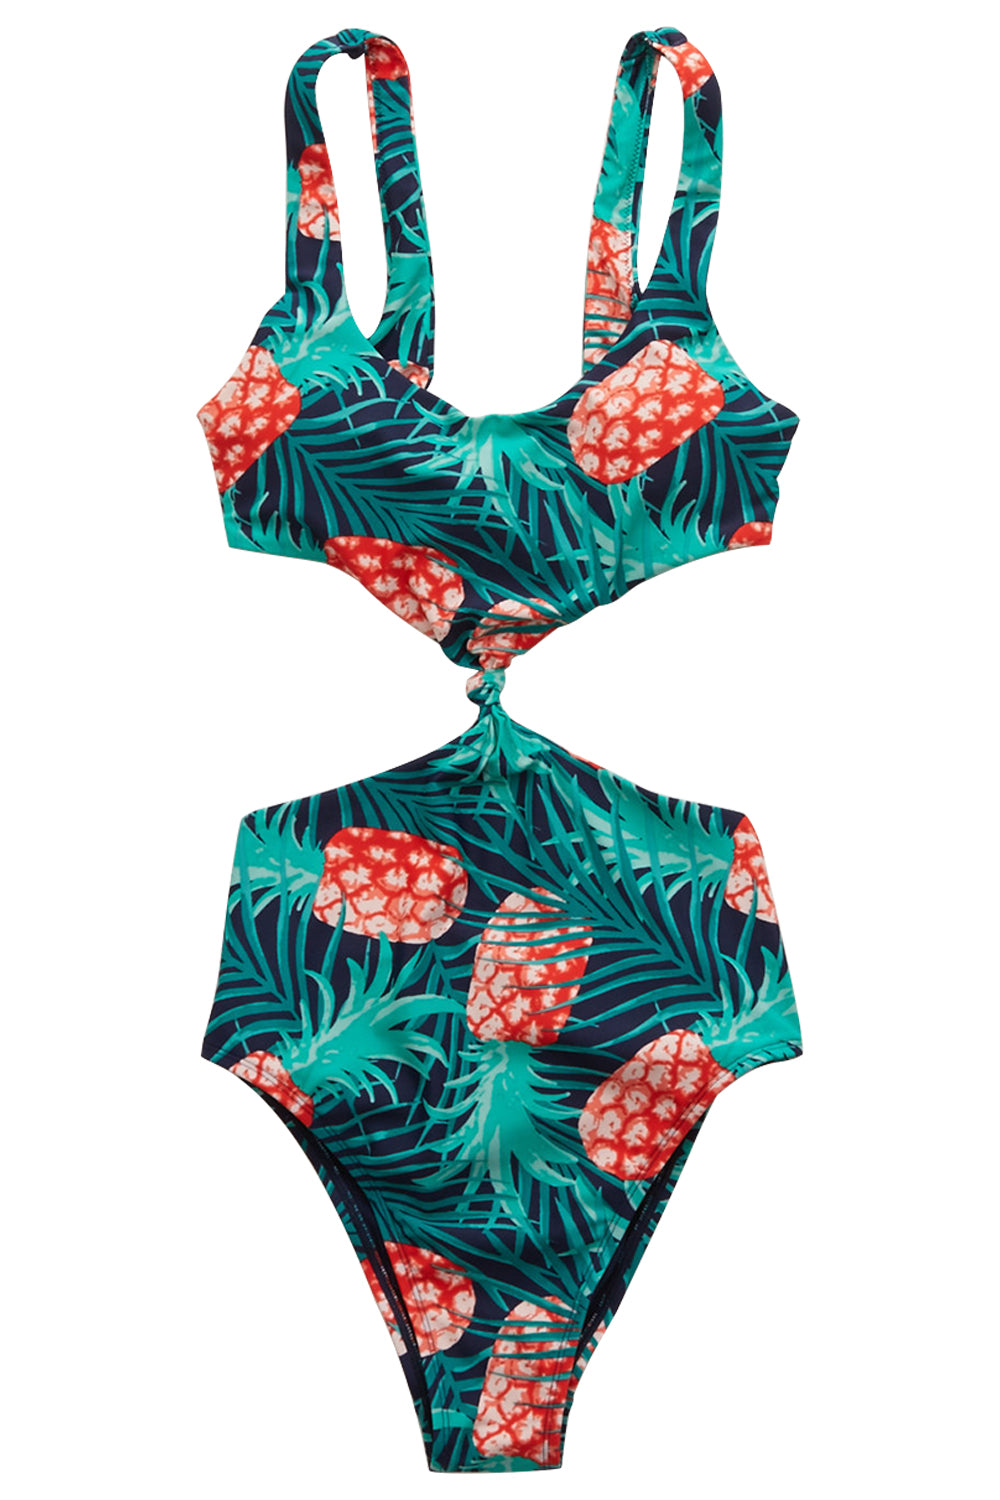 Iyasson Pineapple Printing Side Hollow Design One-piece Swimsuit